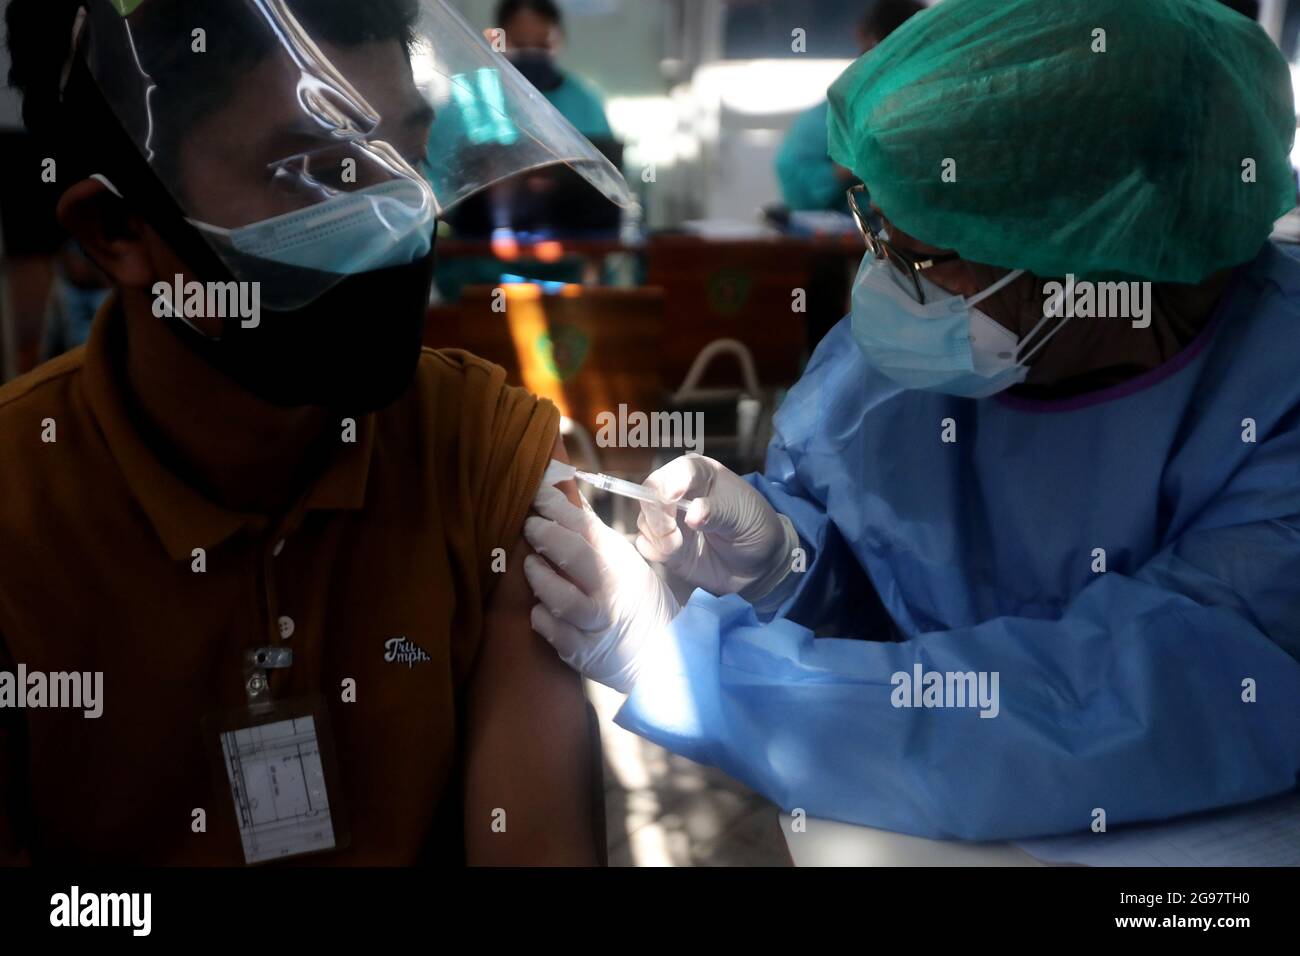 Sidoarjo, Indonesia. 24th July, 2021. A Laborer receives the Sinovac Covid-19 vaccine during a vaccination for Laborer in Sidoarjo, East Java, Indonesia, on July 24, 2021. (Photo by Boy Slamet/INA Photo Agency/Sipa USA) Credit: Sipa USA/Alamy Live News Stock Photo